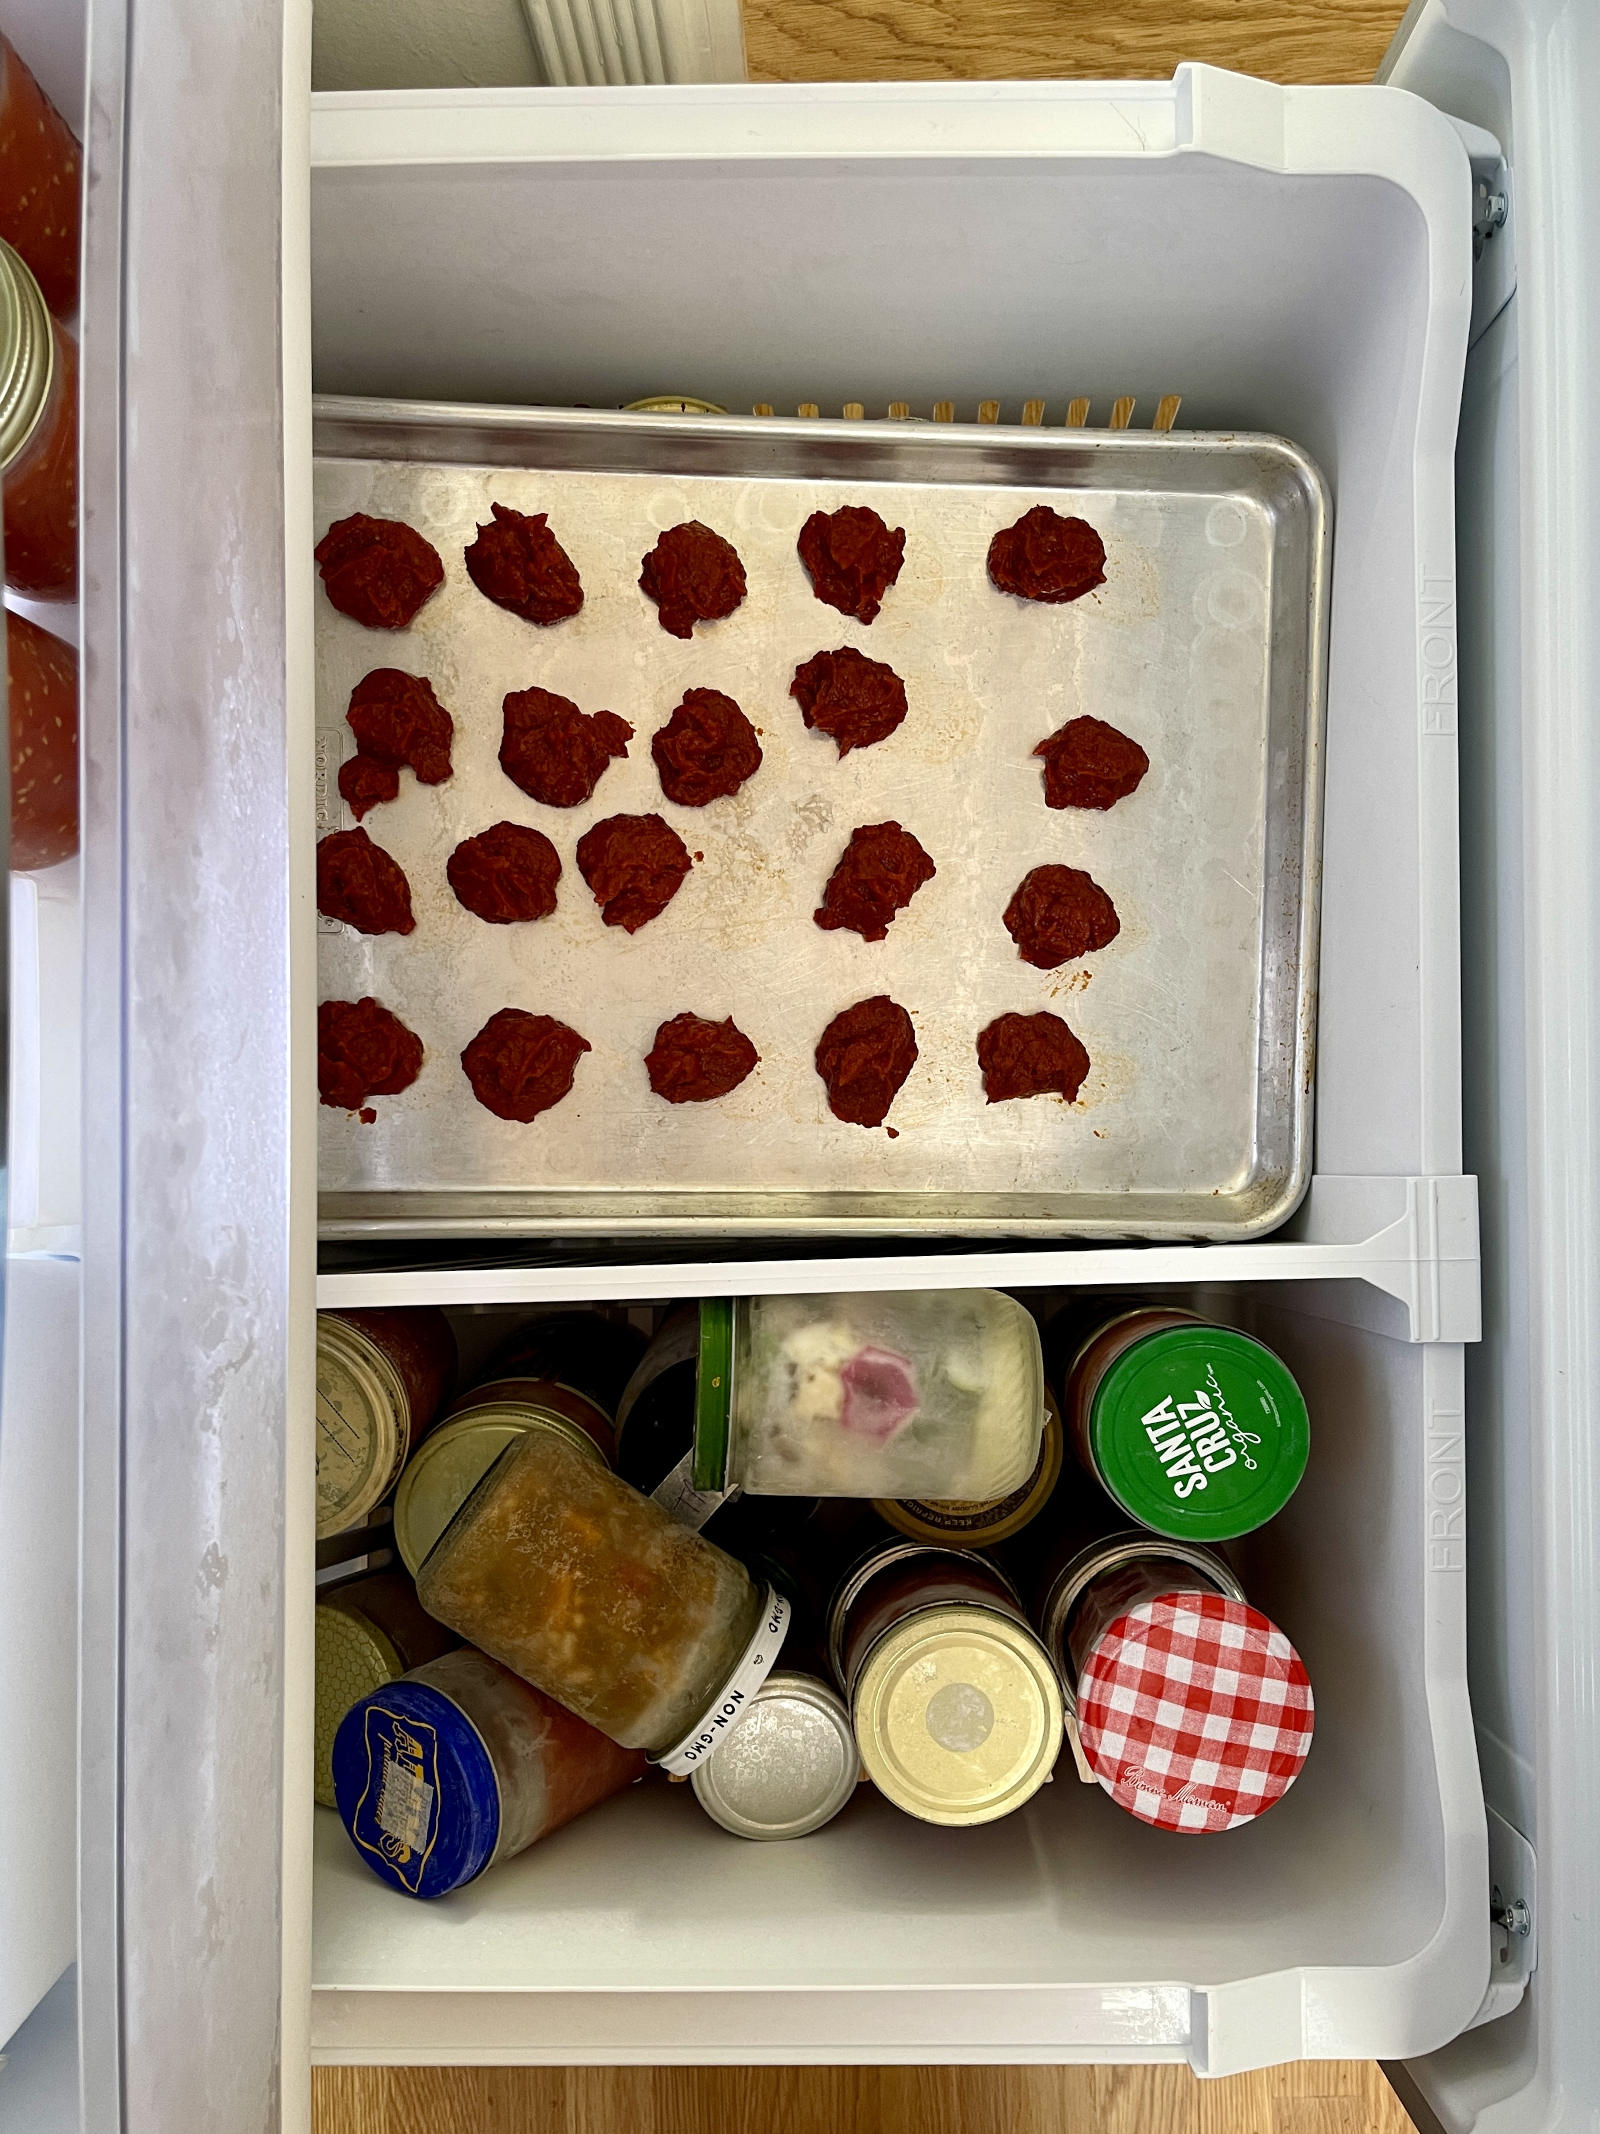 A silver cookie sheet in the freezer has frozen blobs of tomato paste spread across it. In the compartment next to the cookie sheet are a bunch of glass jars filled with frozen food.